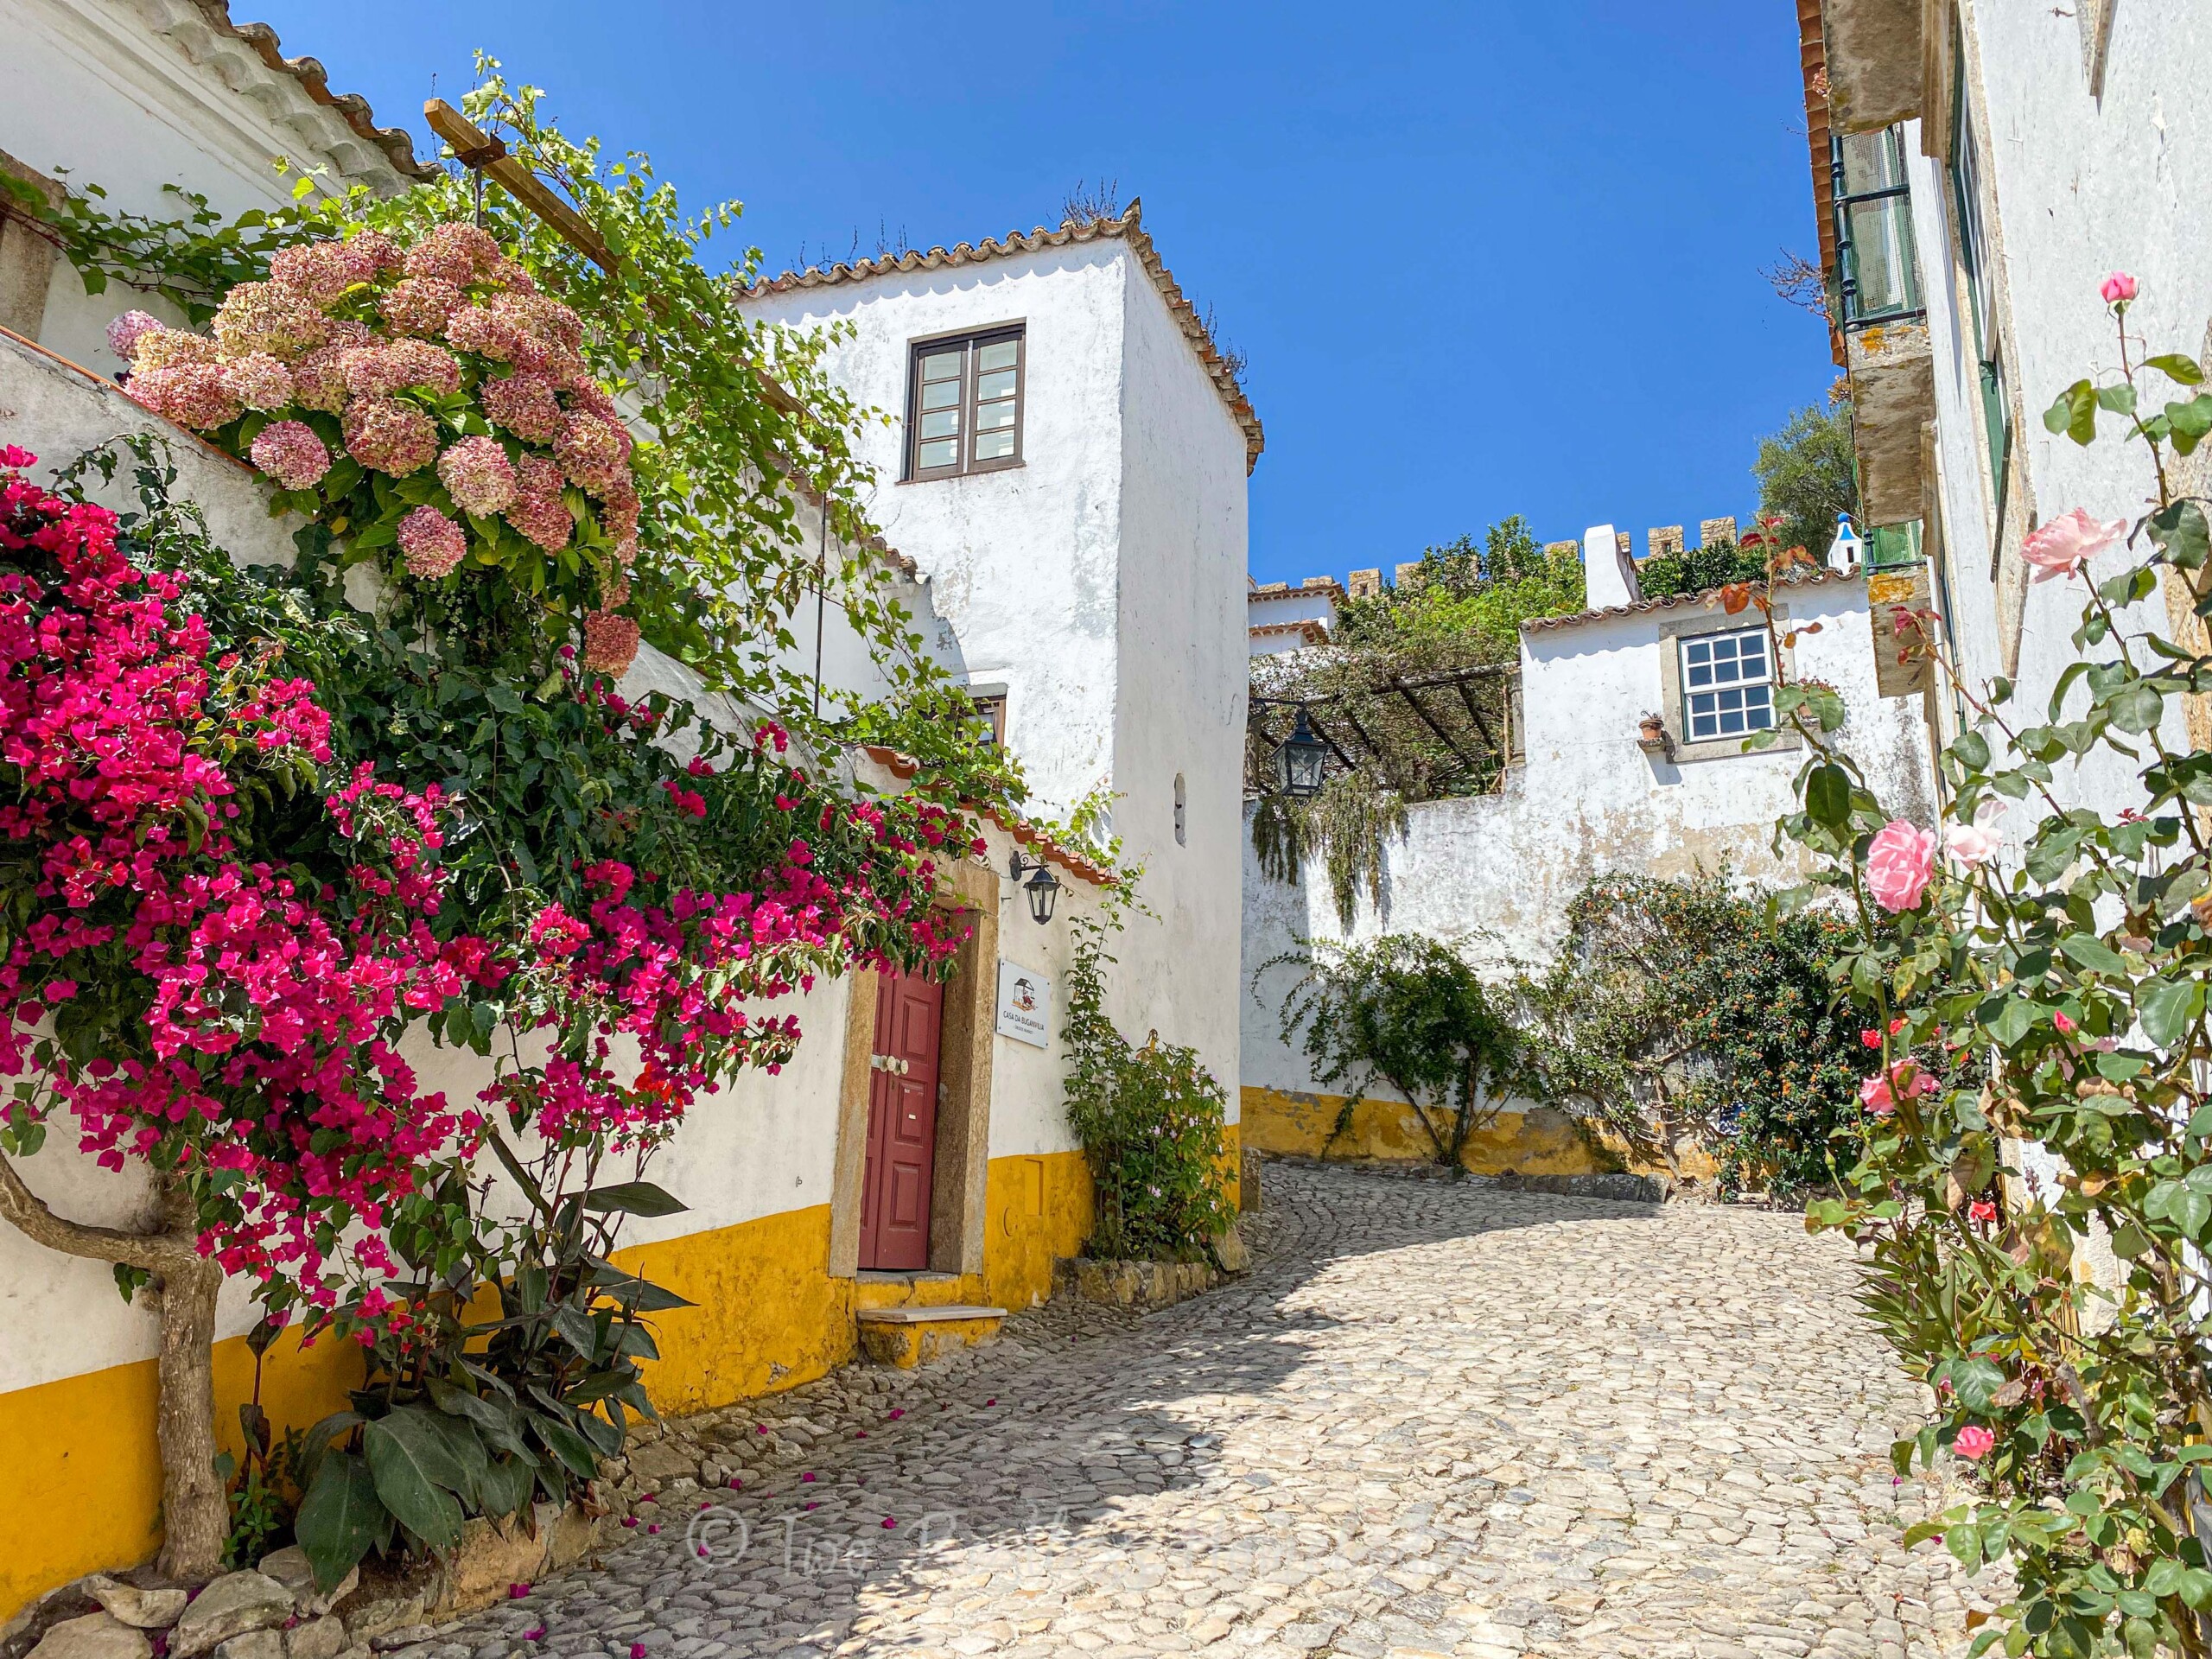 Obidos - buildings and hydrangeas - Two Restless Homebodies